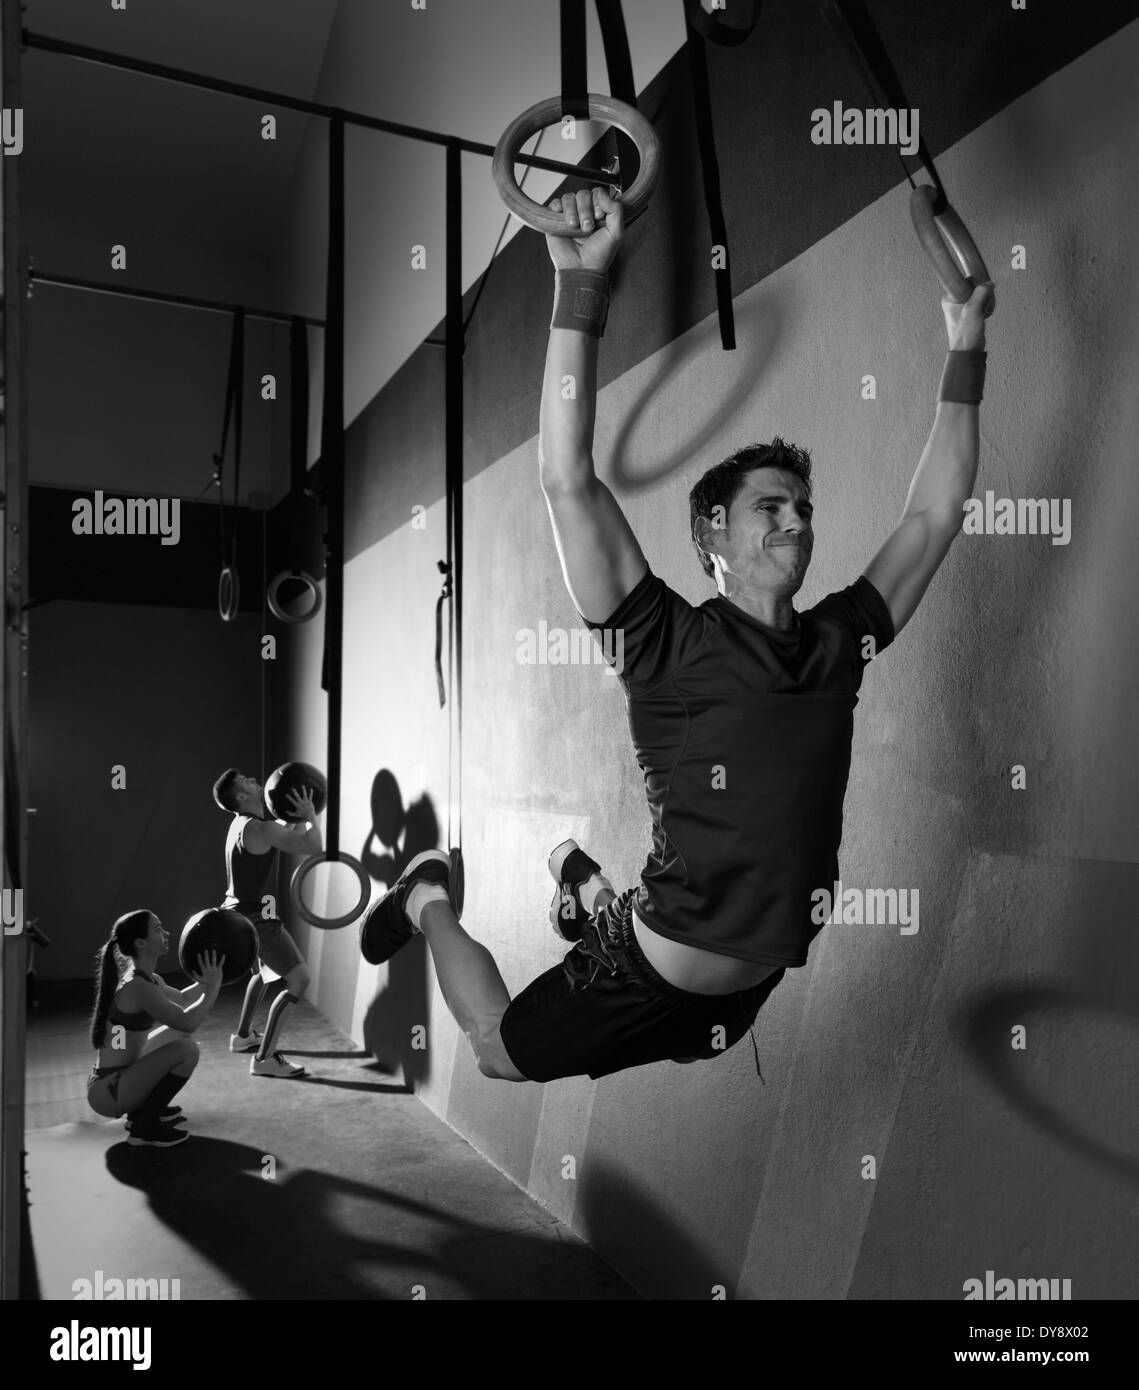 Muscle ups rings man swinging workout exercise at gym Stock Photo